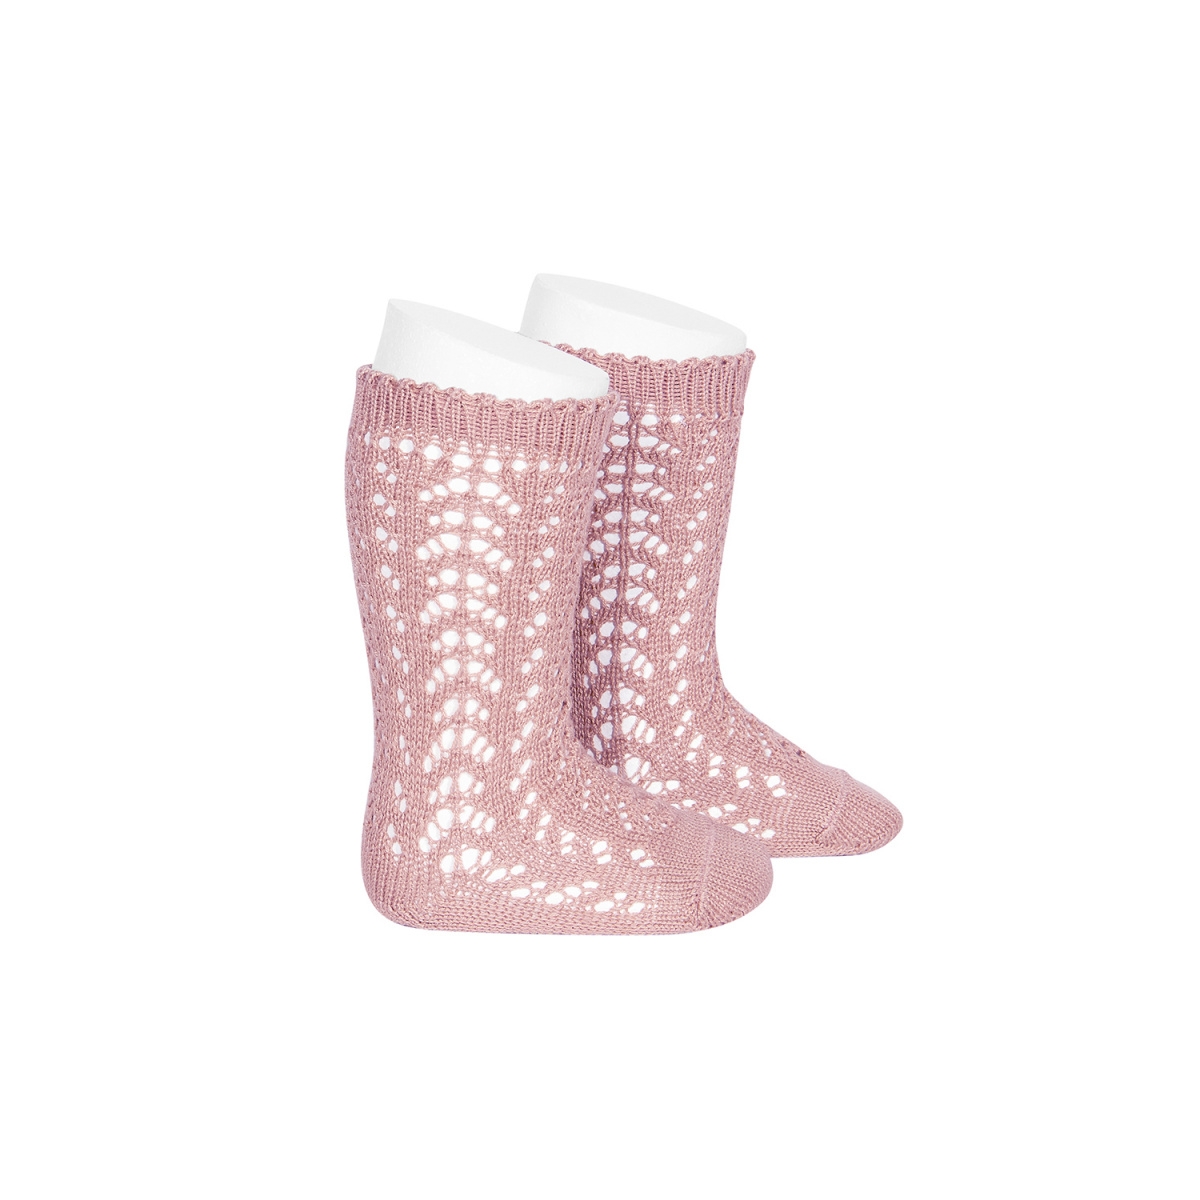 Condor Cotton Knee High Sock pale pink 2.518/2_526 